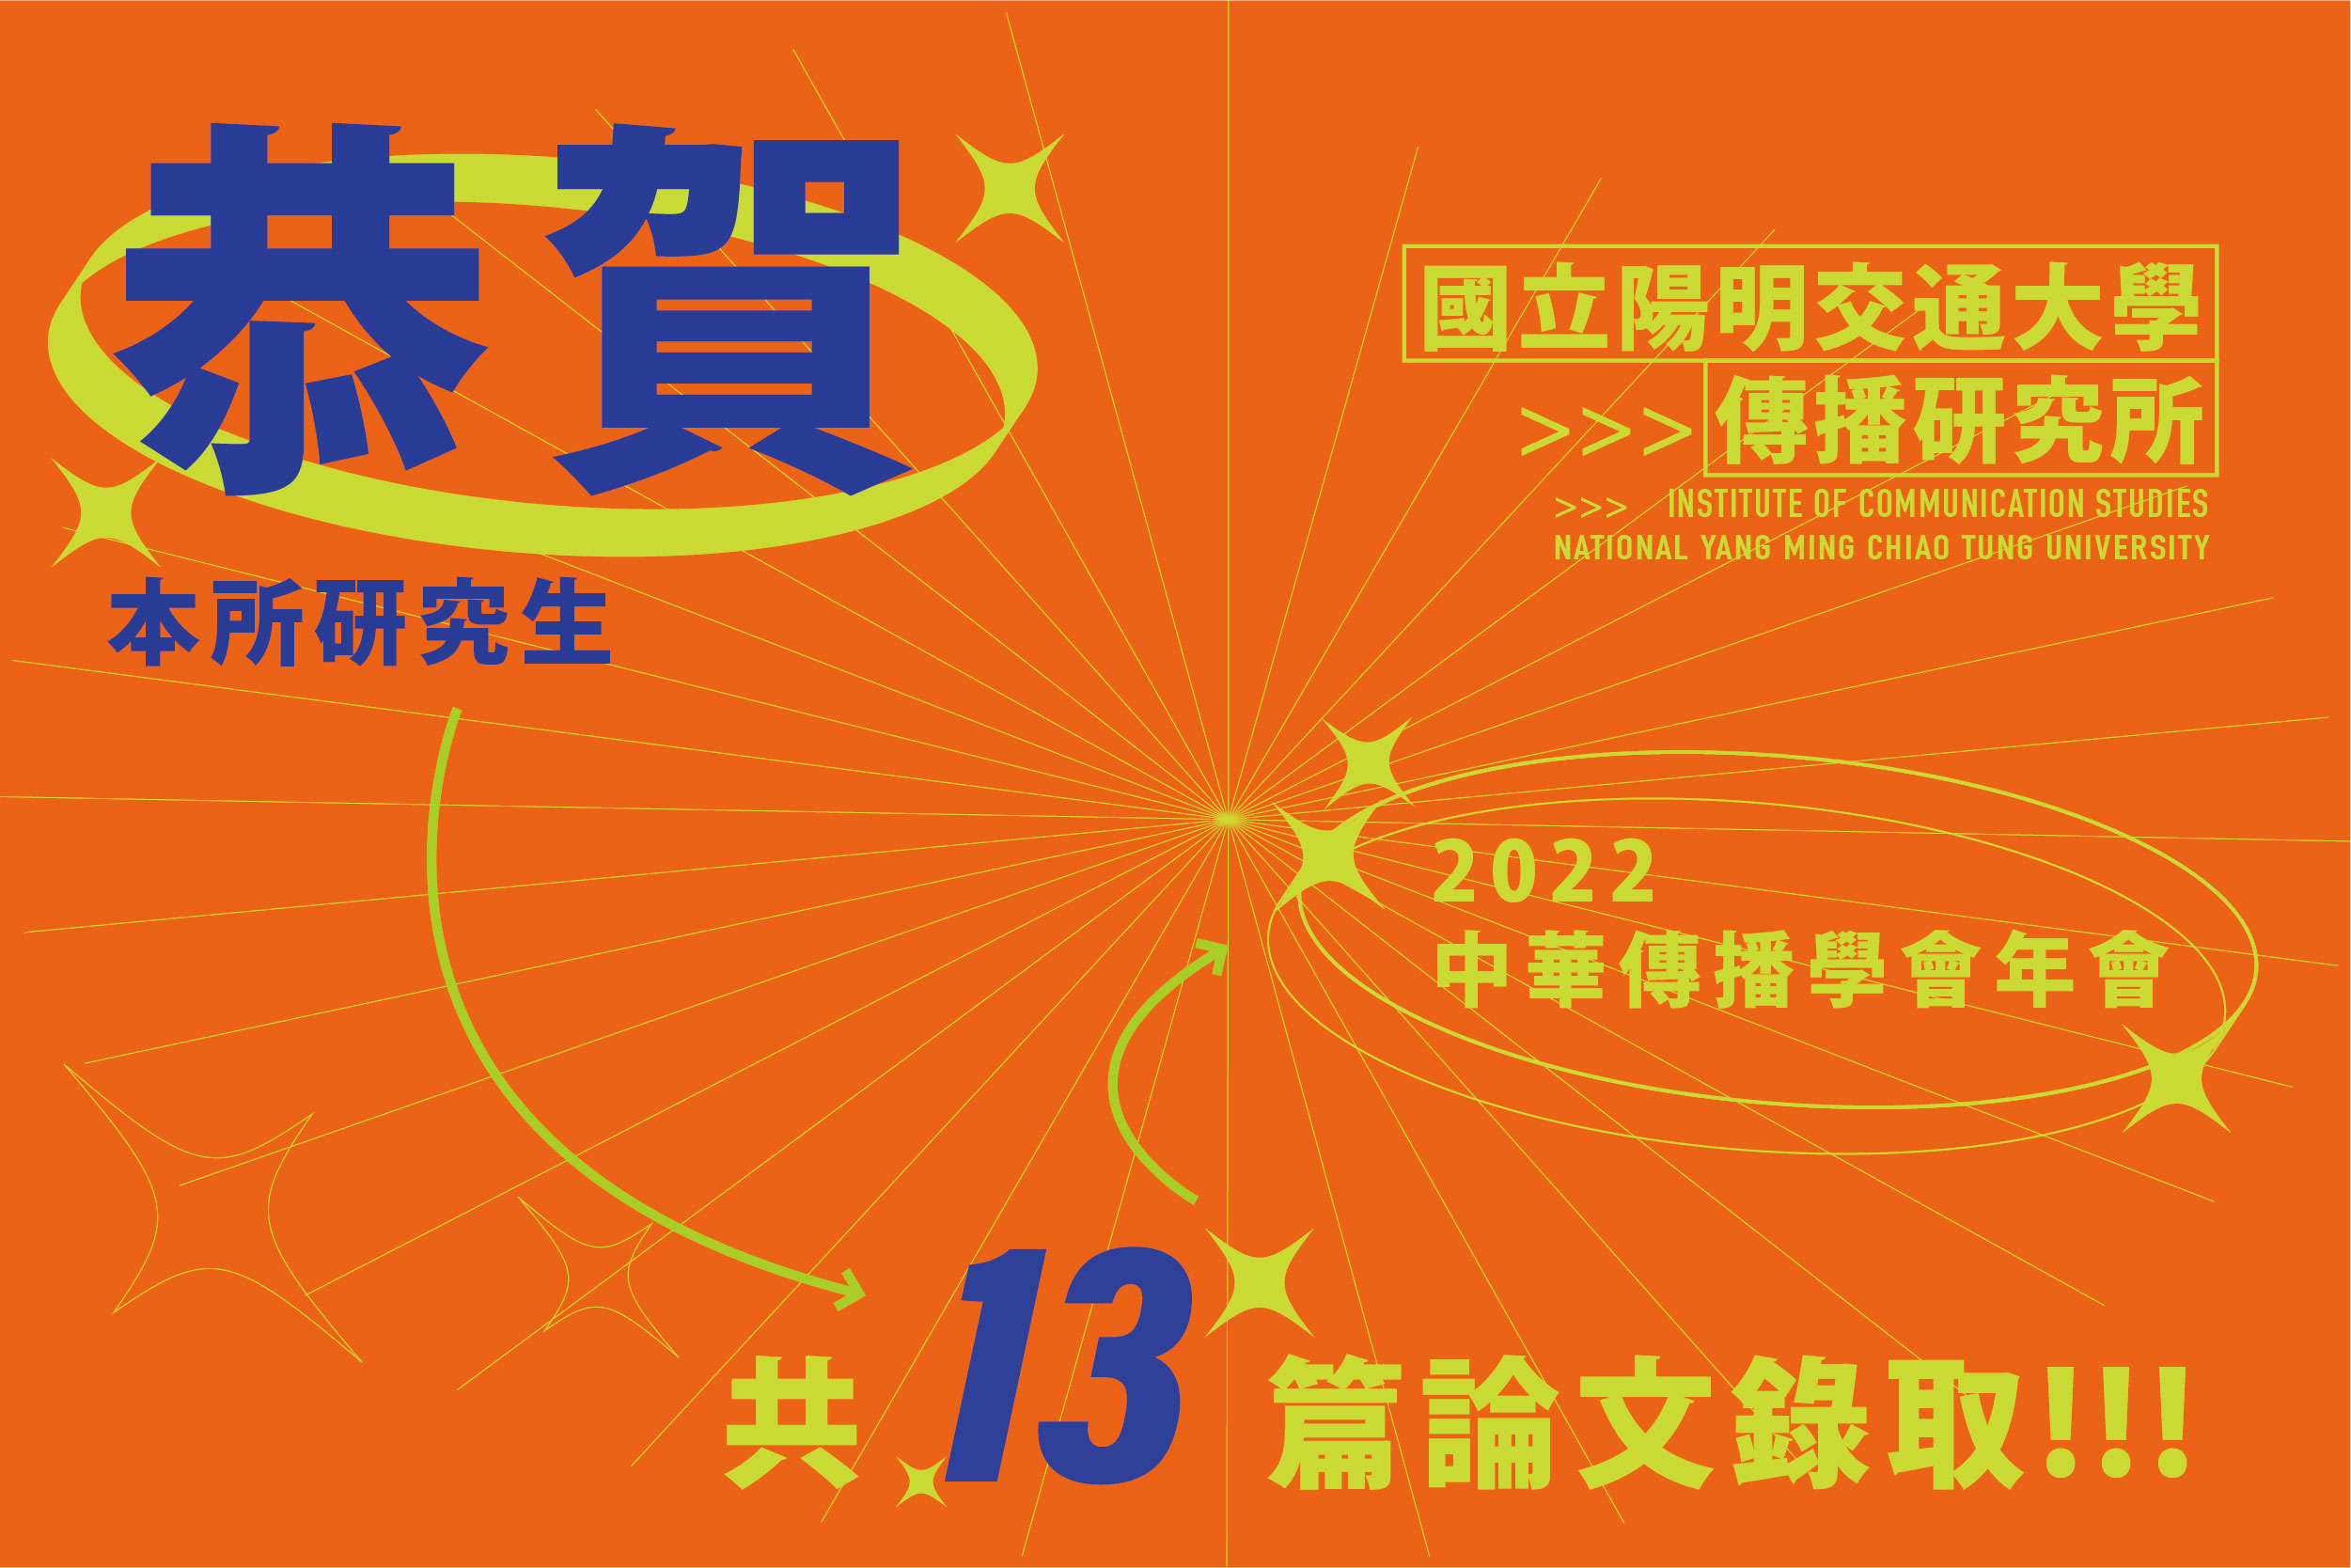 【ICS】Thirteen papers accepted for presentation at the Annual Conference of Academy for Chinese Communication Society, 2022.